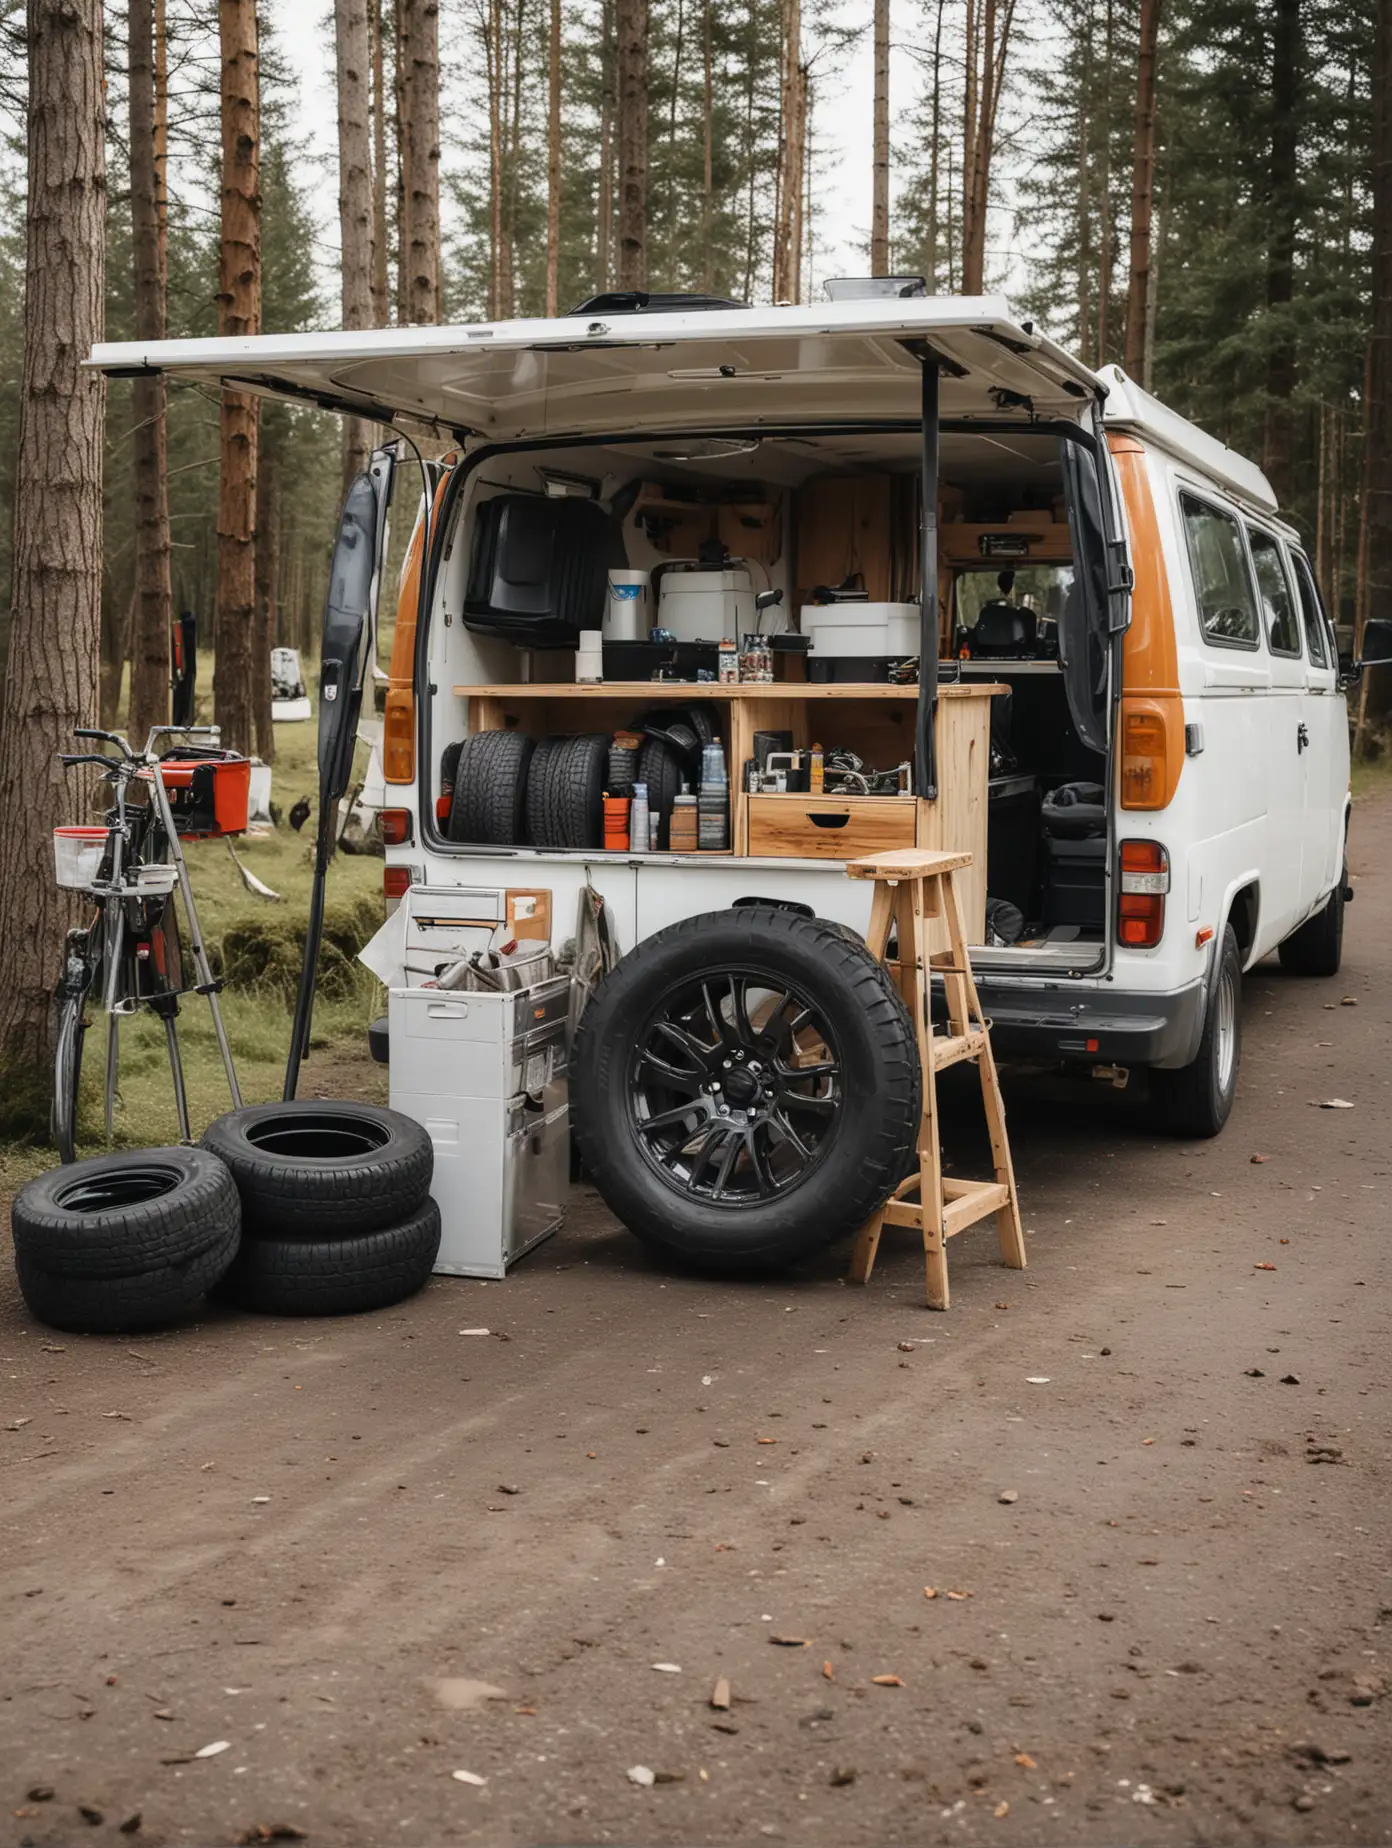 mobile well-kept tire workshop, in a campervan, business look, lots of outdoor space, side view, driving
